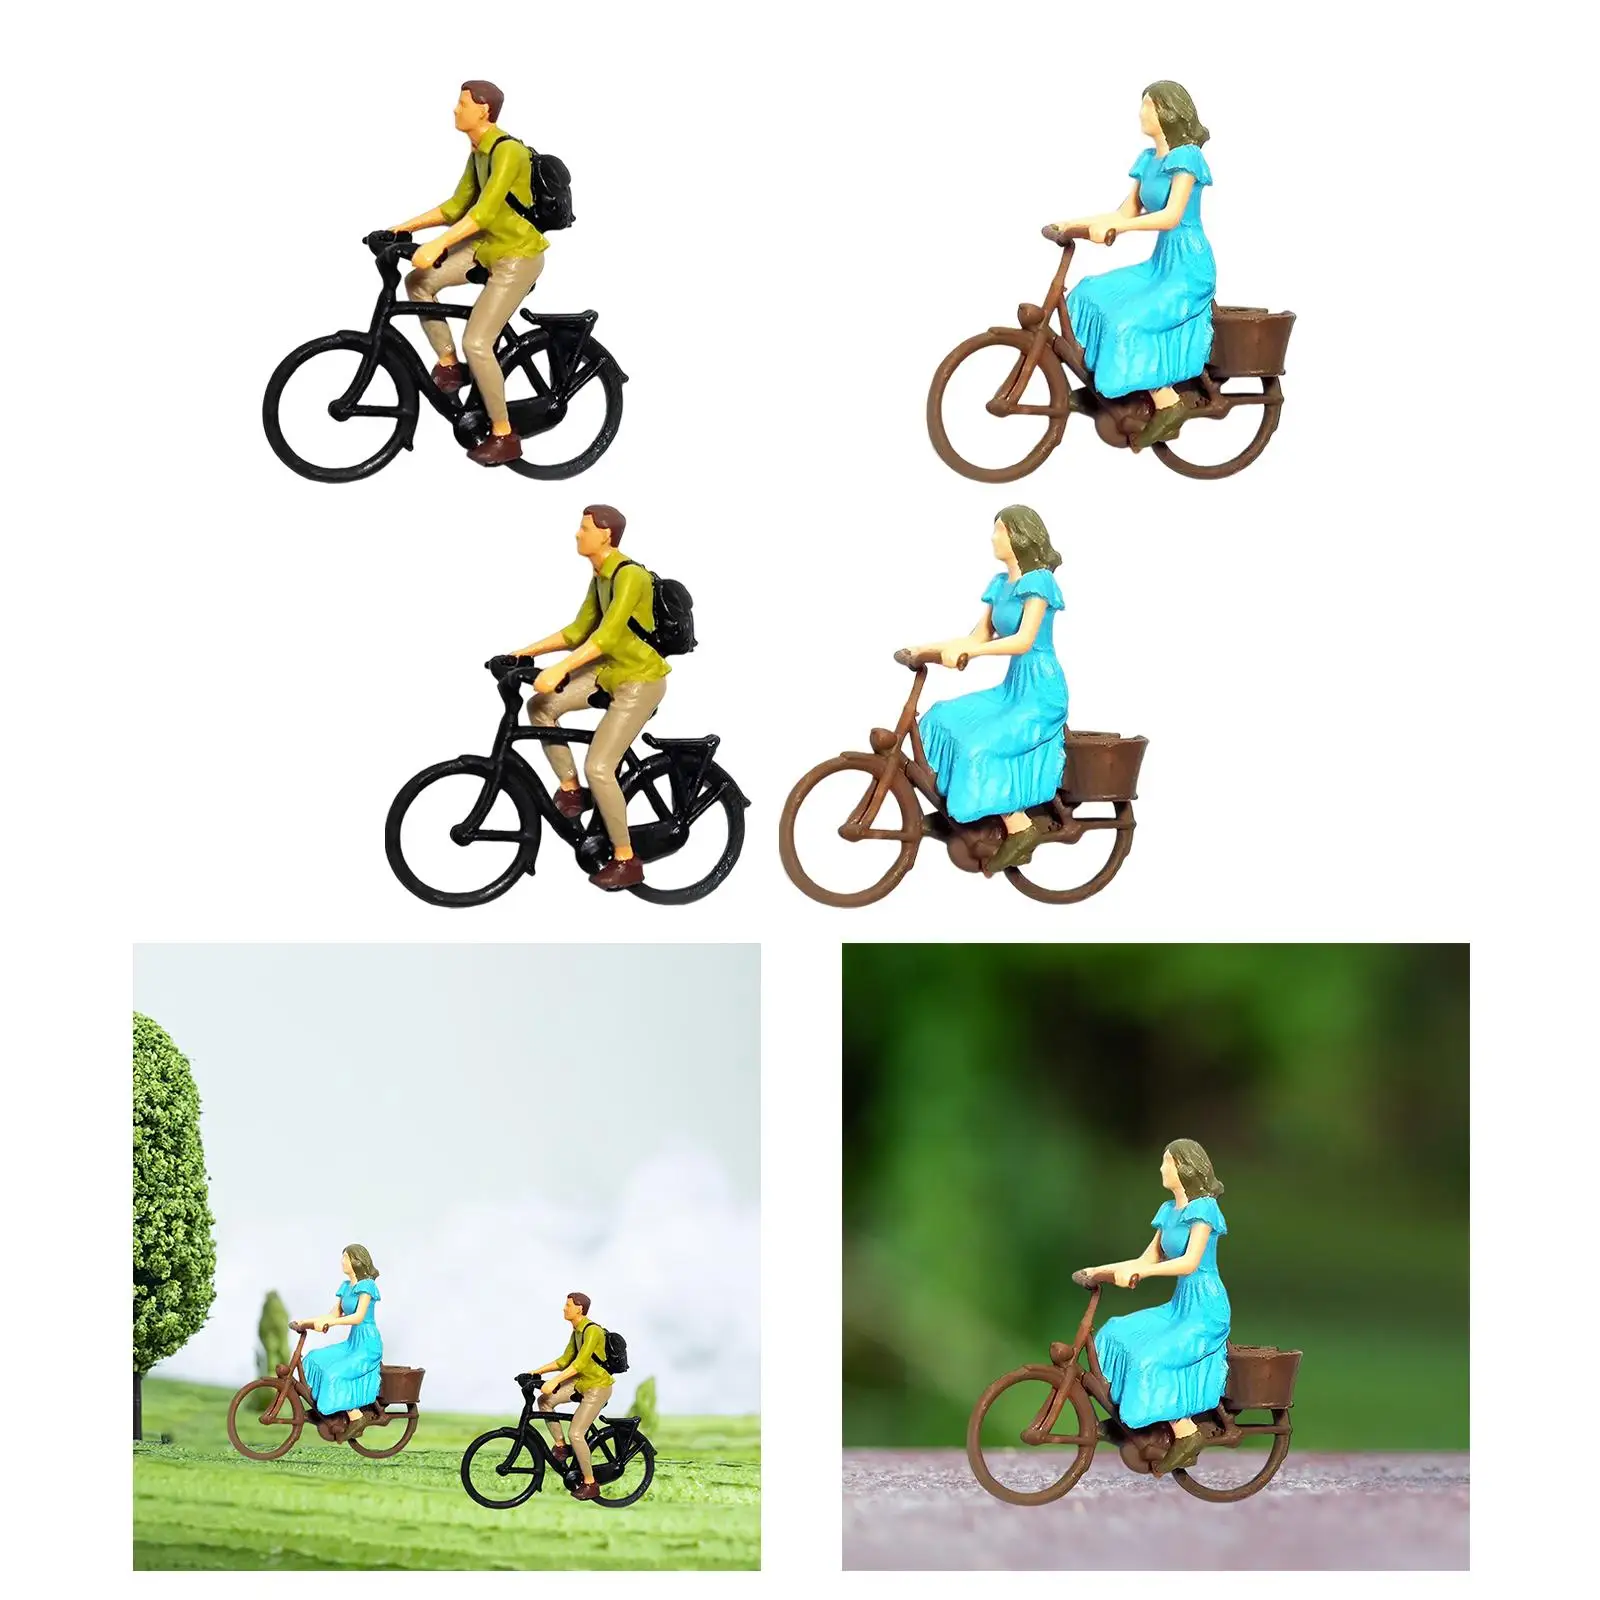 Resin 1/87 Scale Cyclist Figurine Simulation People Figurines Tiny People Mini People Model for Cycling Scene Layout Decoration